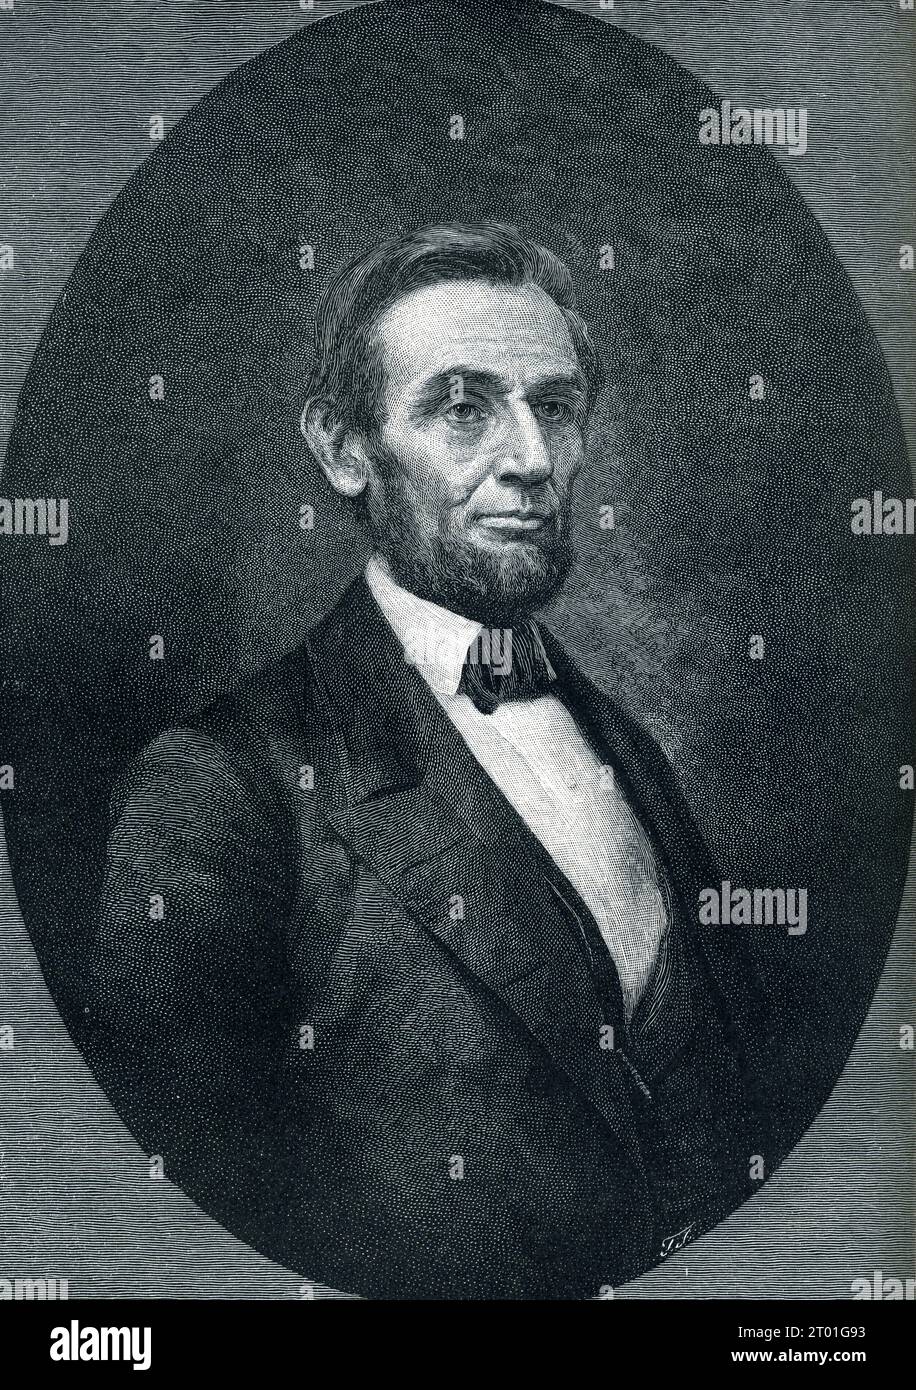 Abraham Lincoln Portrait of 16th US President Stock Photo